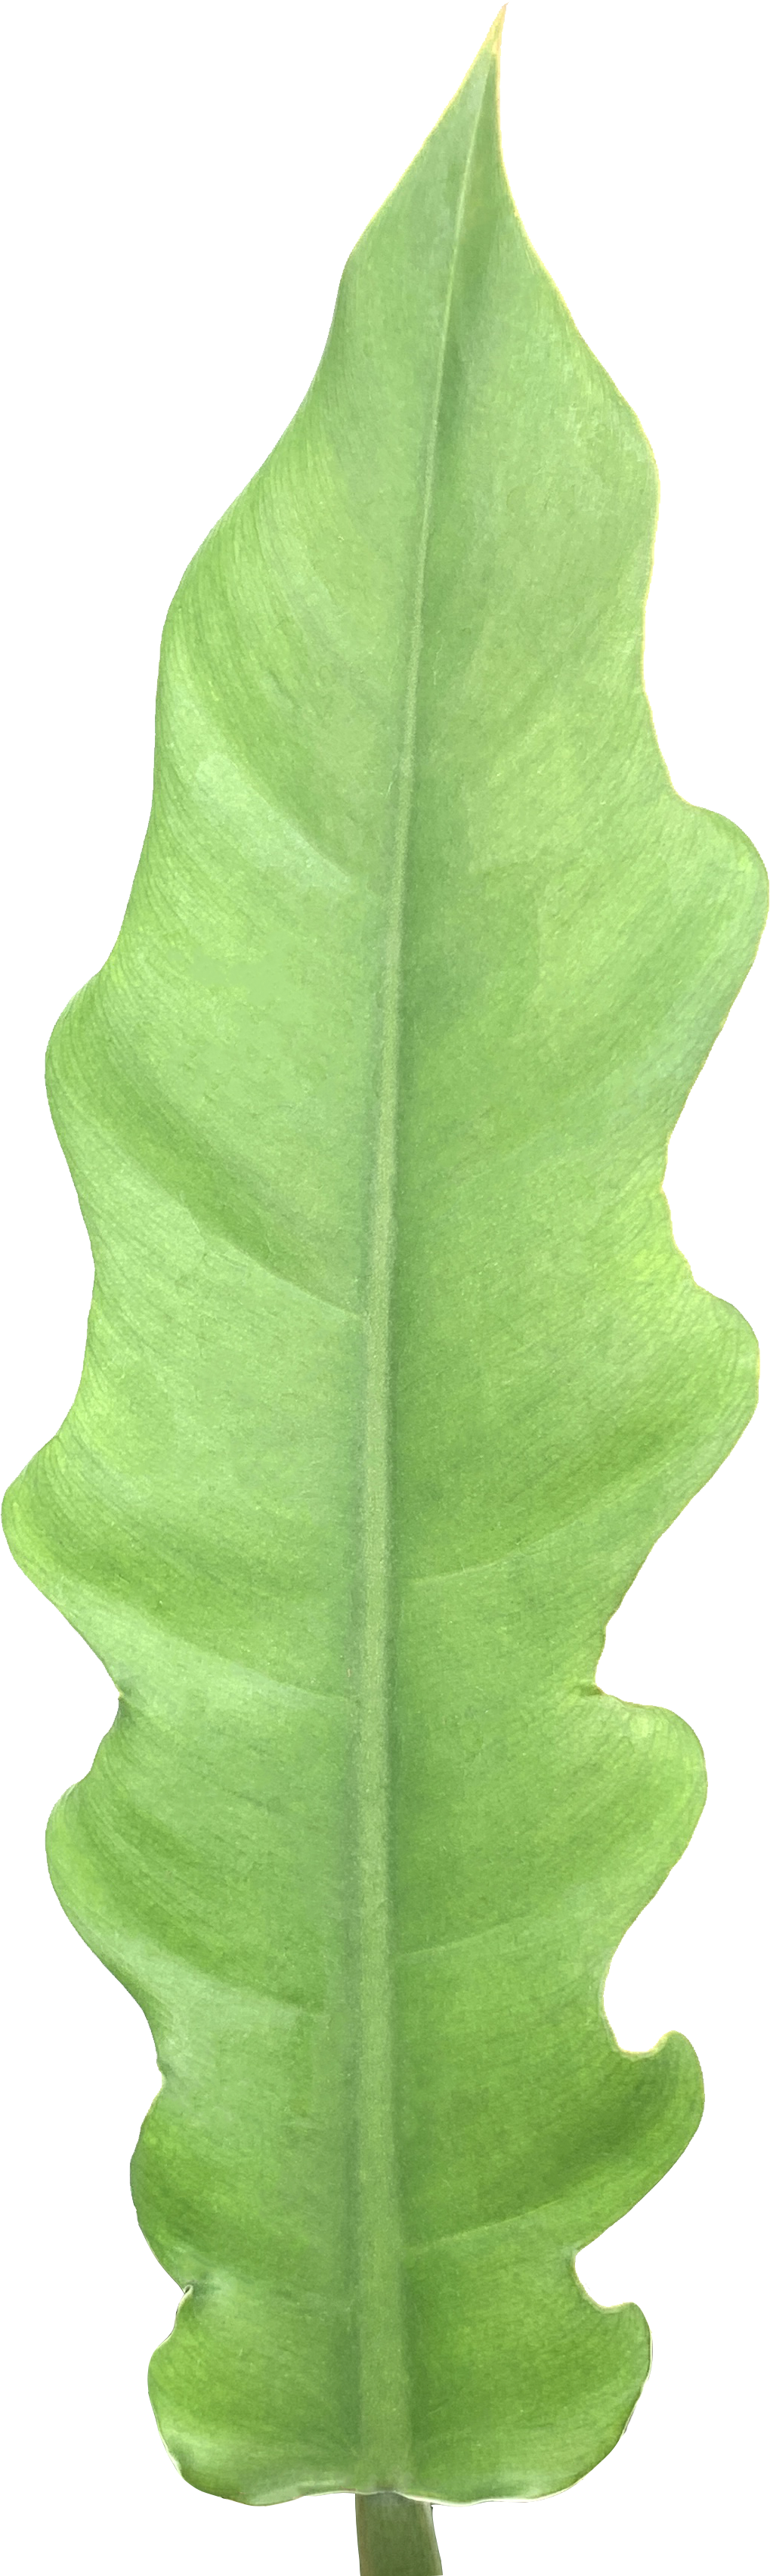 Tiger Tooth Plant, Philodendron Narrow